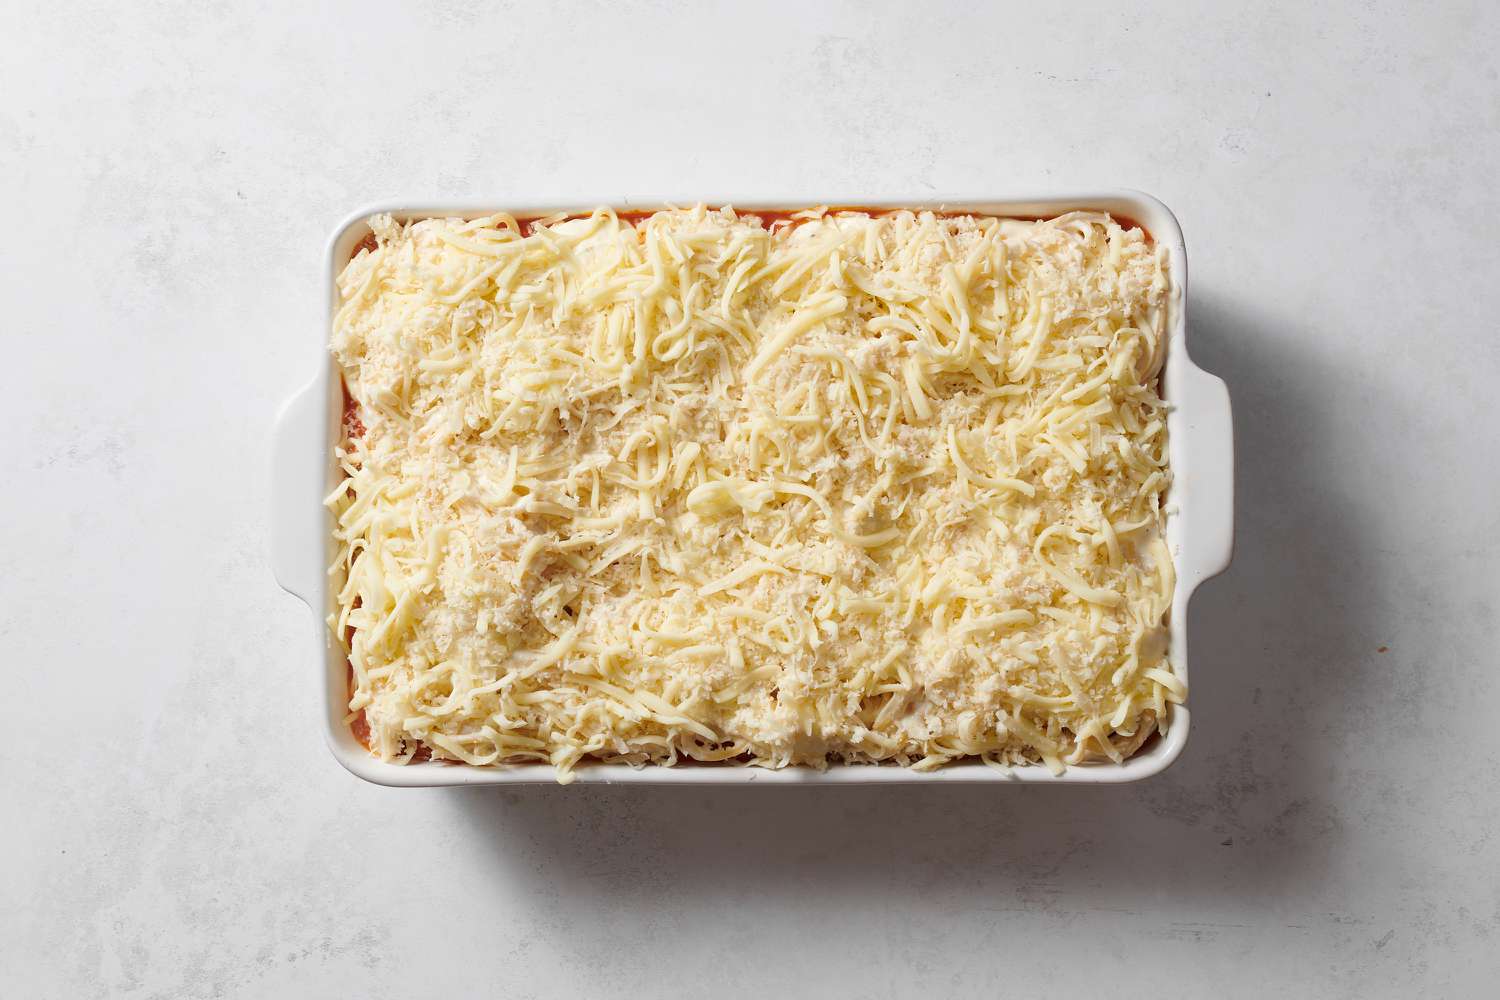 Layered pasta, meat sauce, and cheese in a baking dish